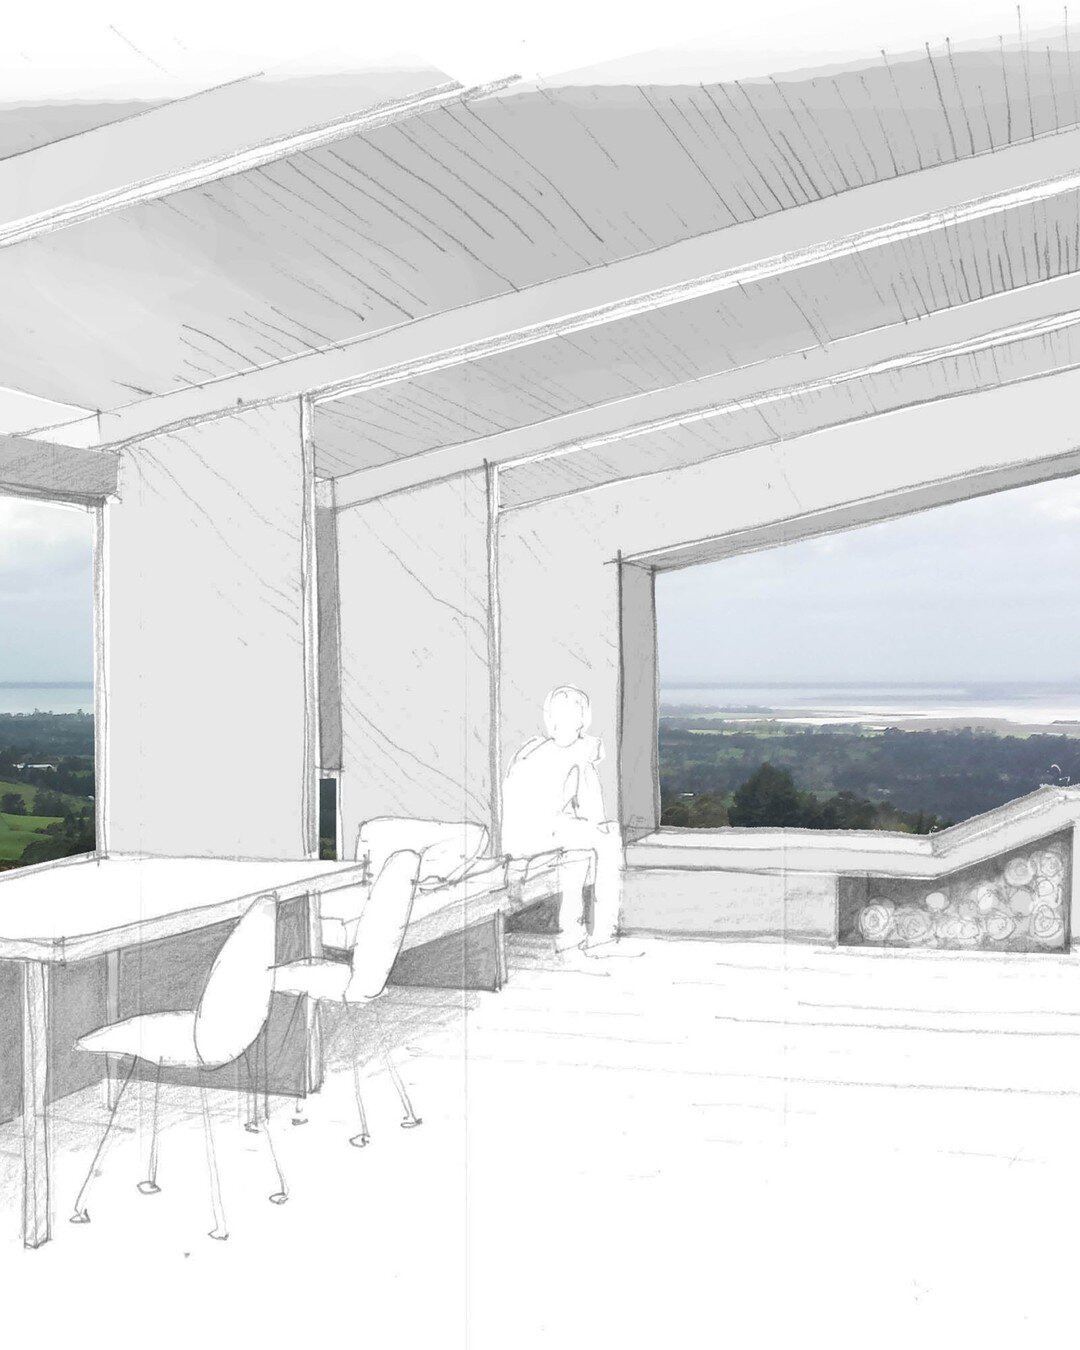 Envisioning Ao Marama retreat⁠.
⁠_______⁠
Read more about this project on the Common Space website linked in bio. ⁠
⁠
https://www.commonspace.co.nz/project-ao-marama⁠
__________⁠
Check out Ao Marama project in the Here Magazine Summer 2020 issue⁠
@th